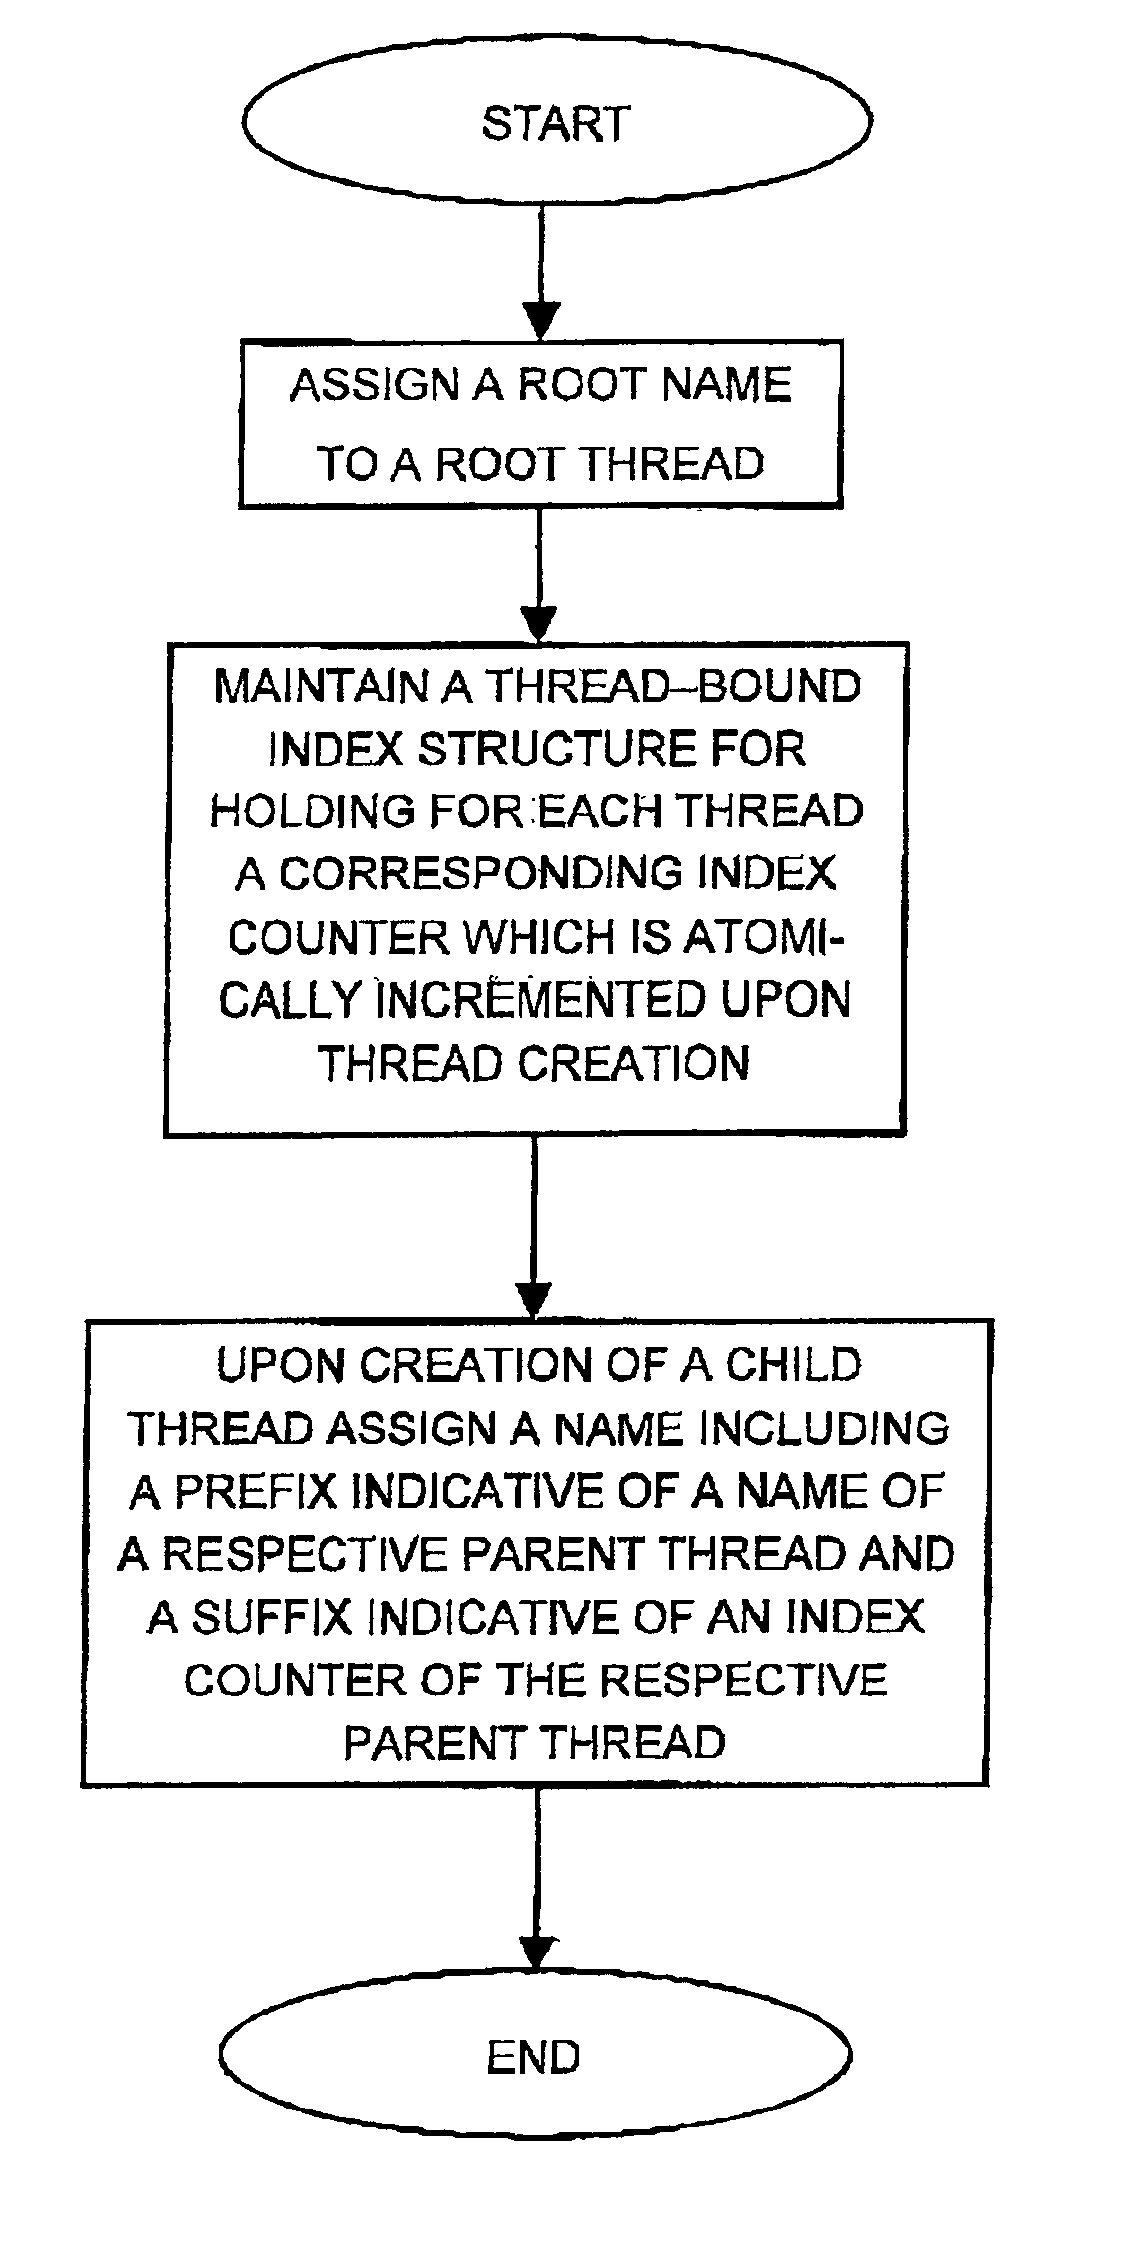 Computer-implemented method and system for automatically invoking a predetermined debugger command at a desired location of a single thread of a program